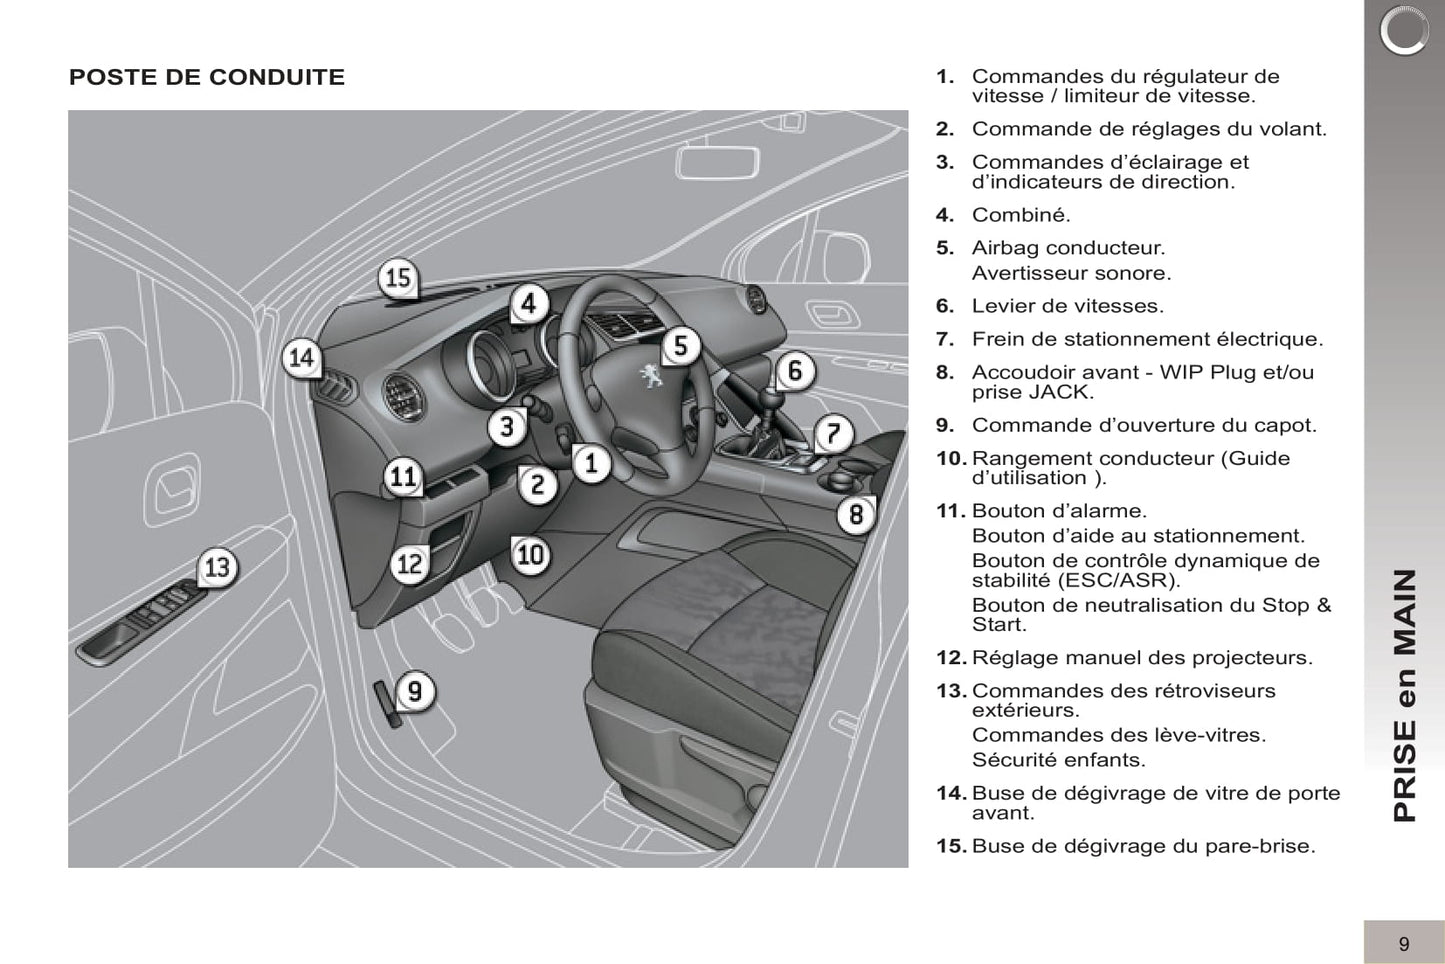 2012-2013 Peugeot 3008 Owner's Manual | French